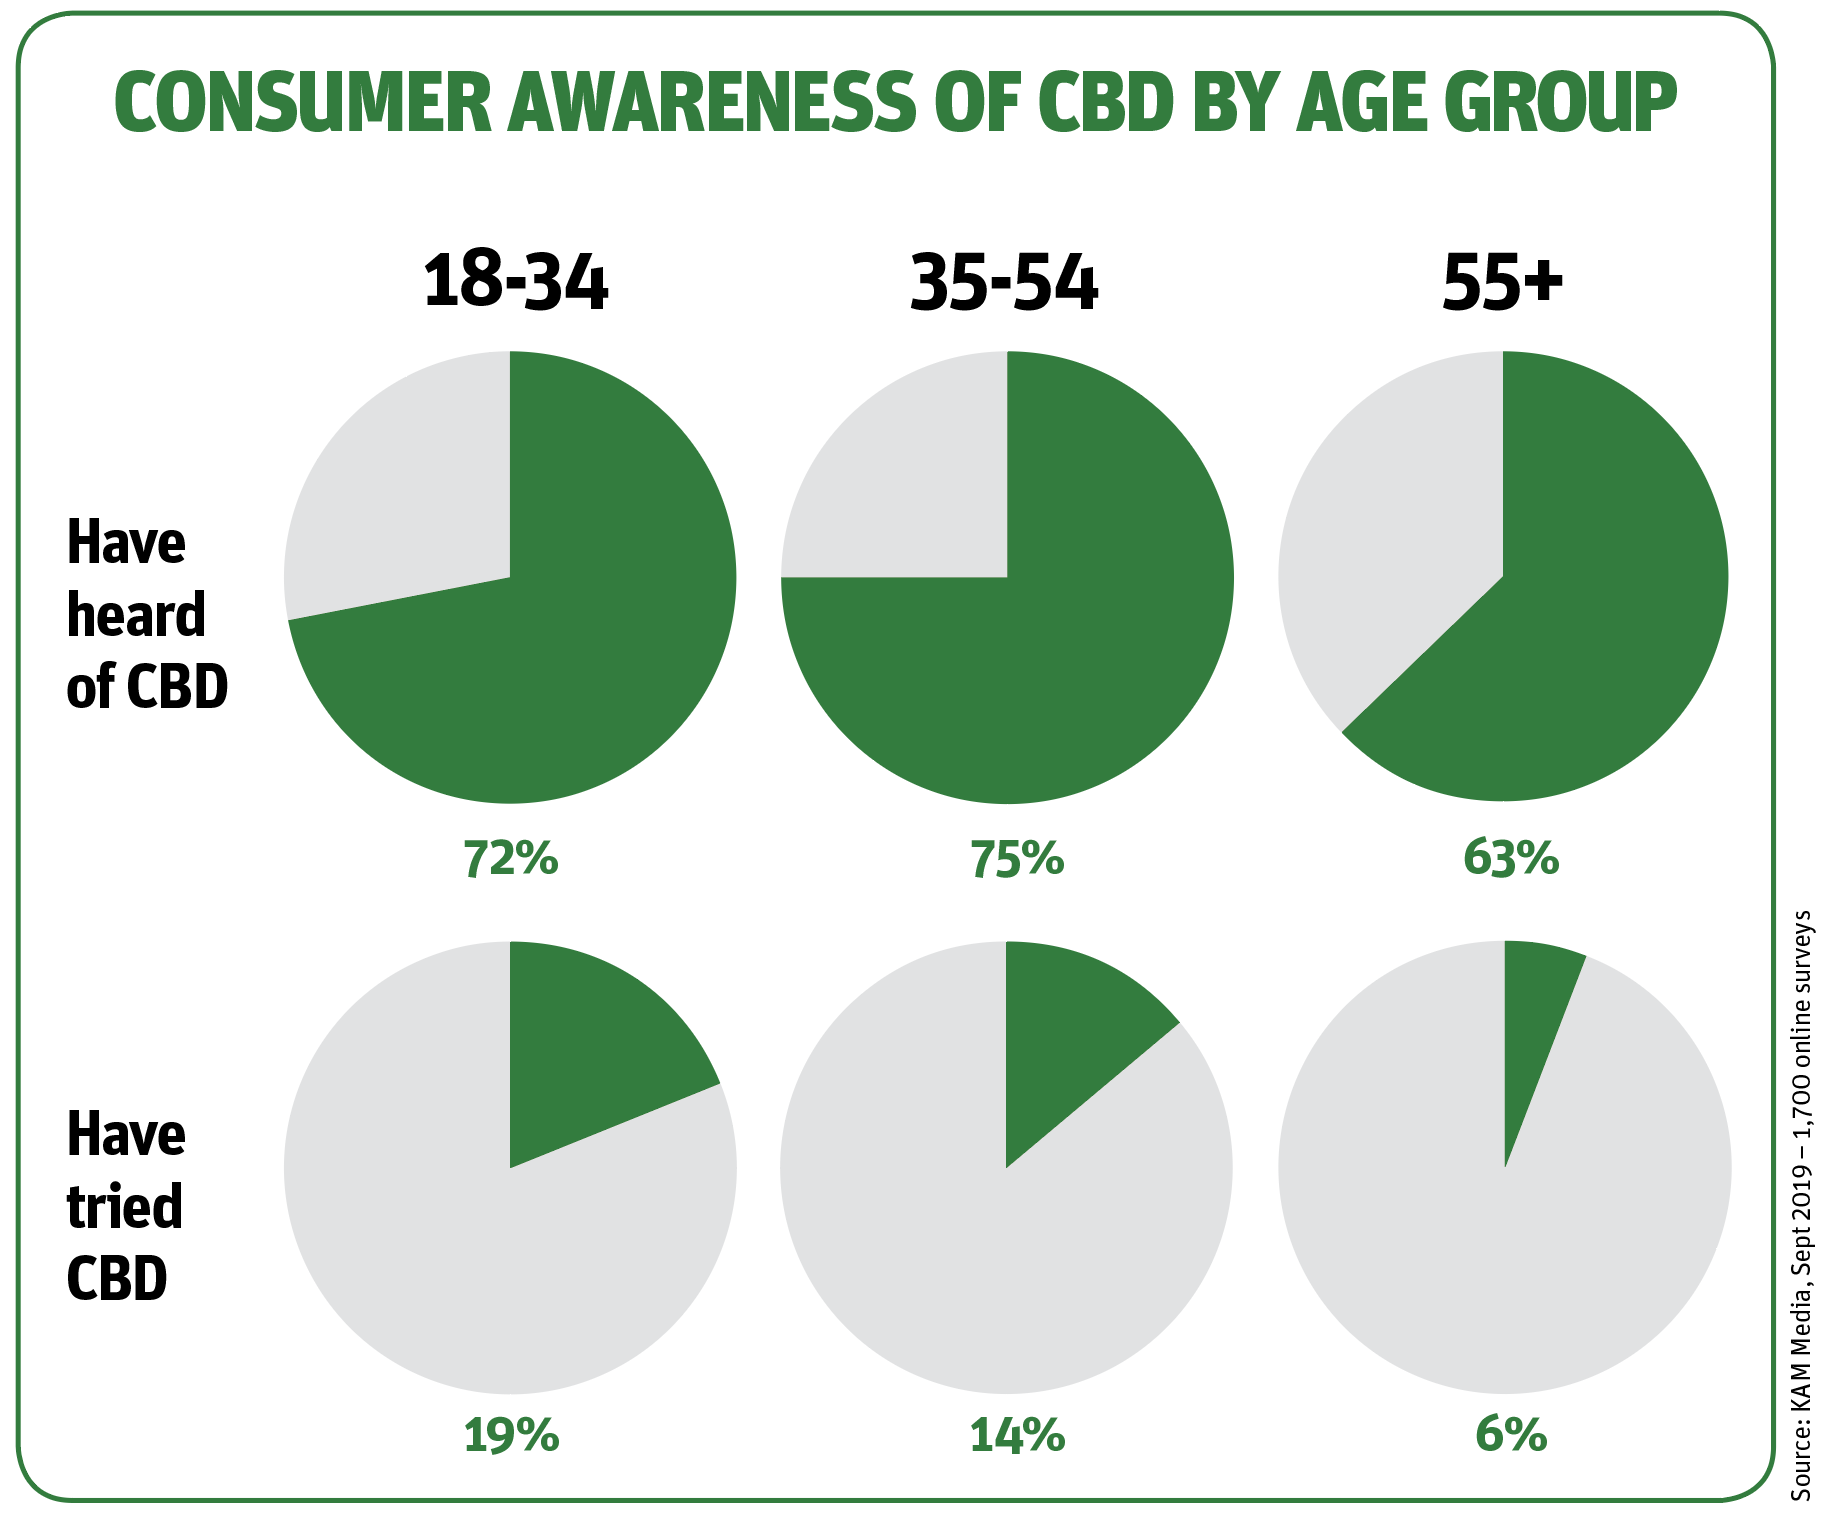 Consumer awareness of CBD by age group pie charts